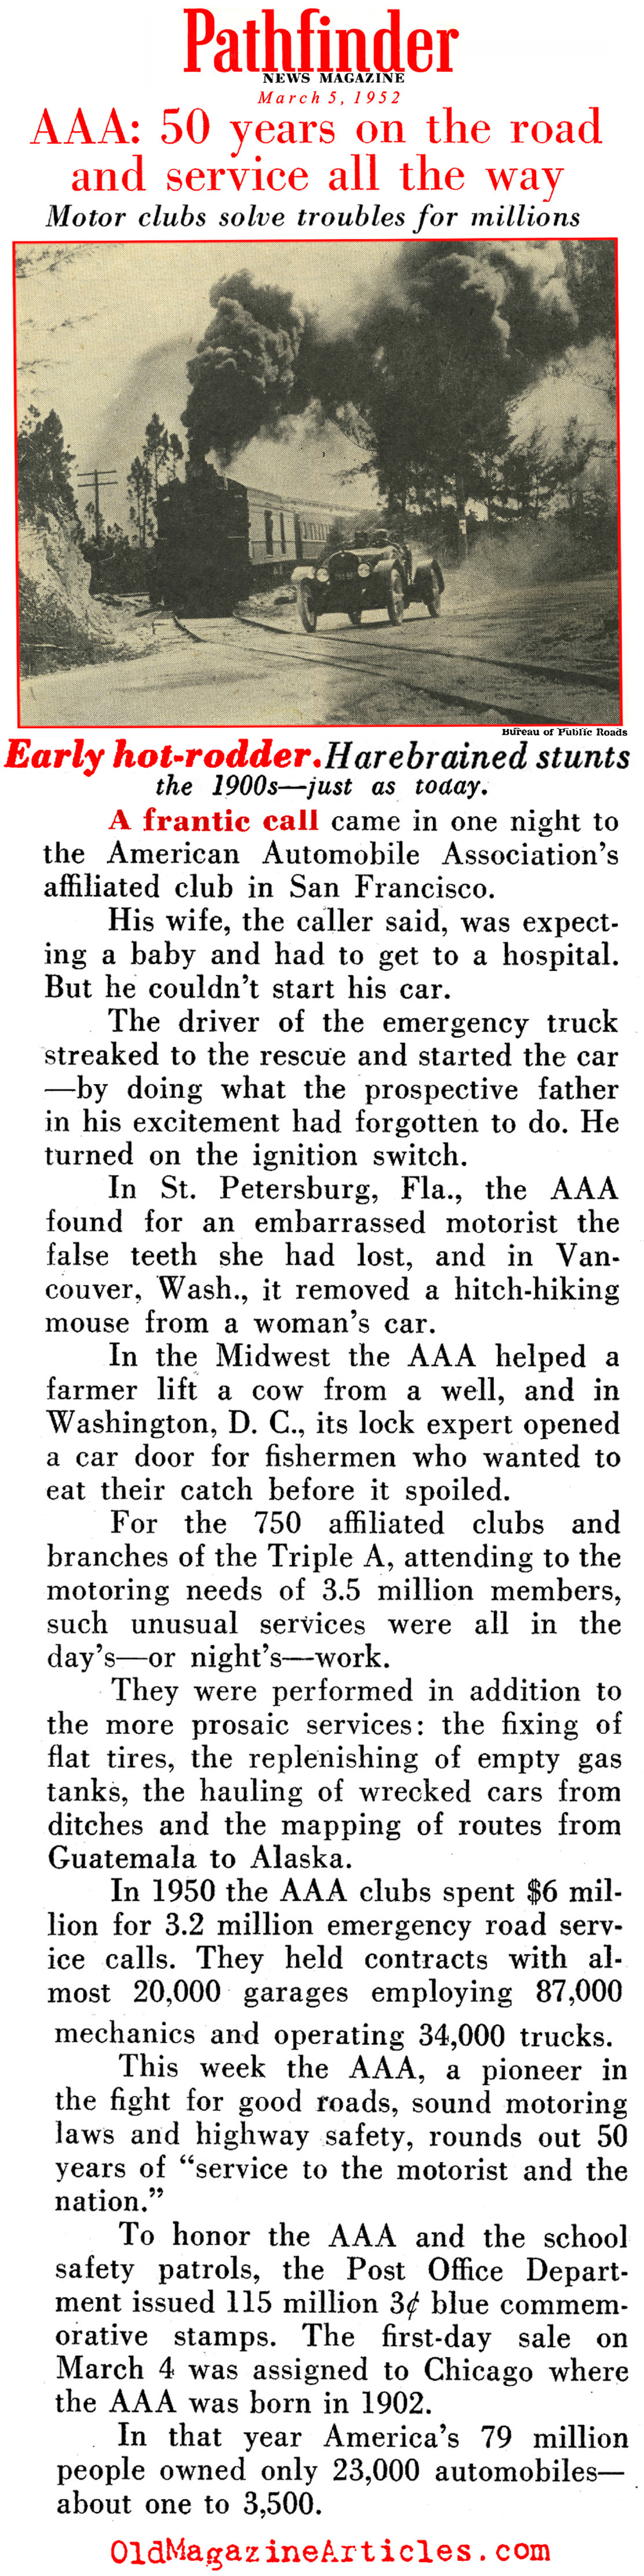 The First Fifty-Years Behind the Wheel (Pathfinder Magazine, 1952)